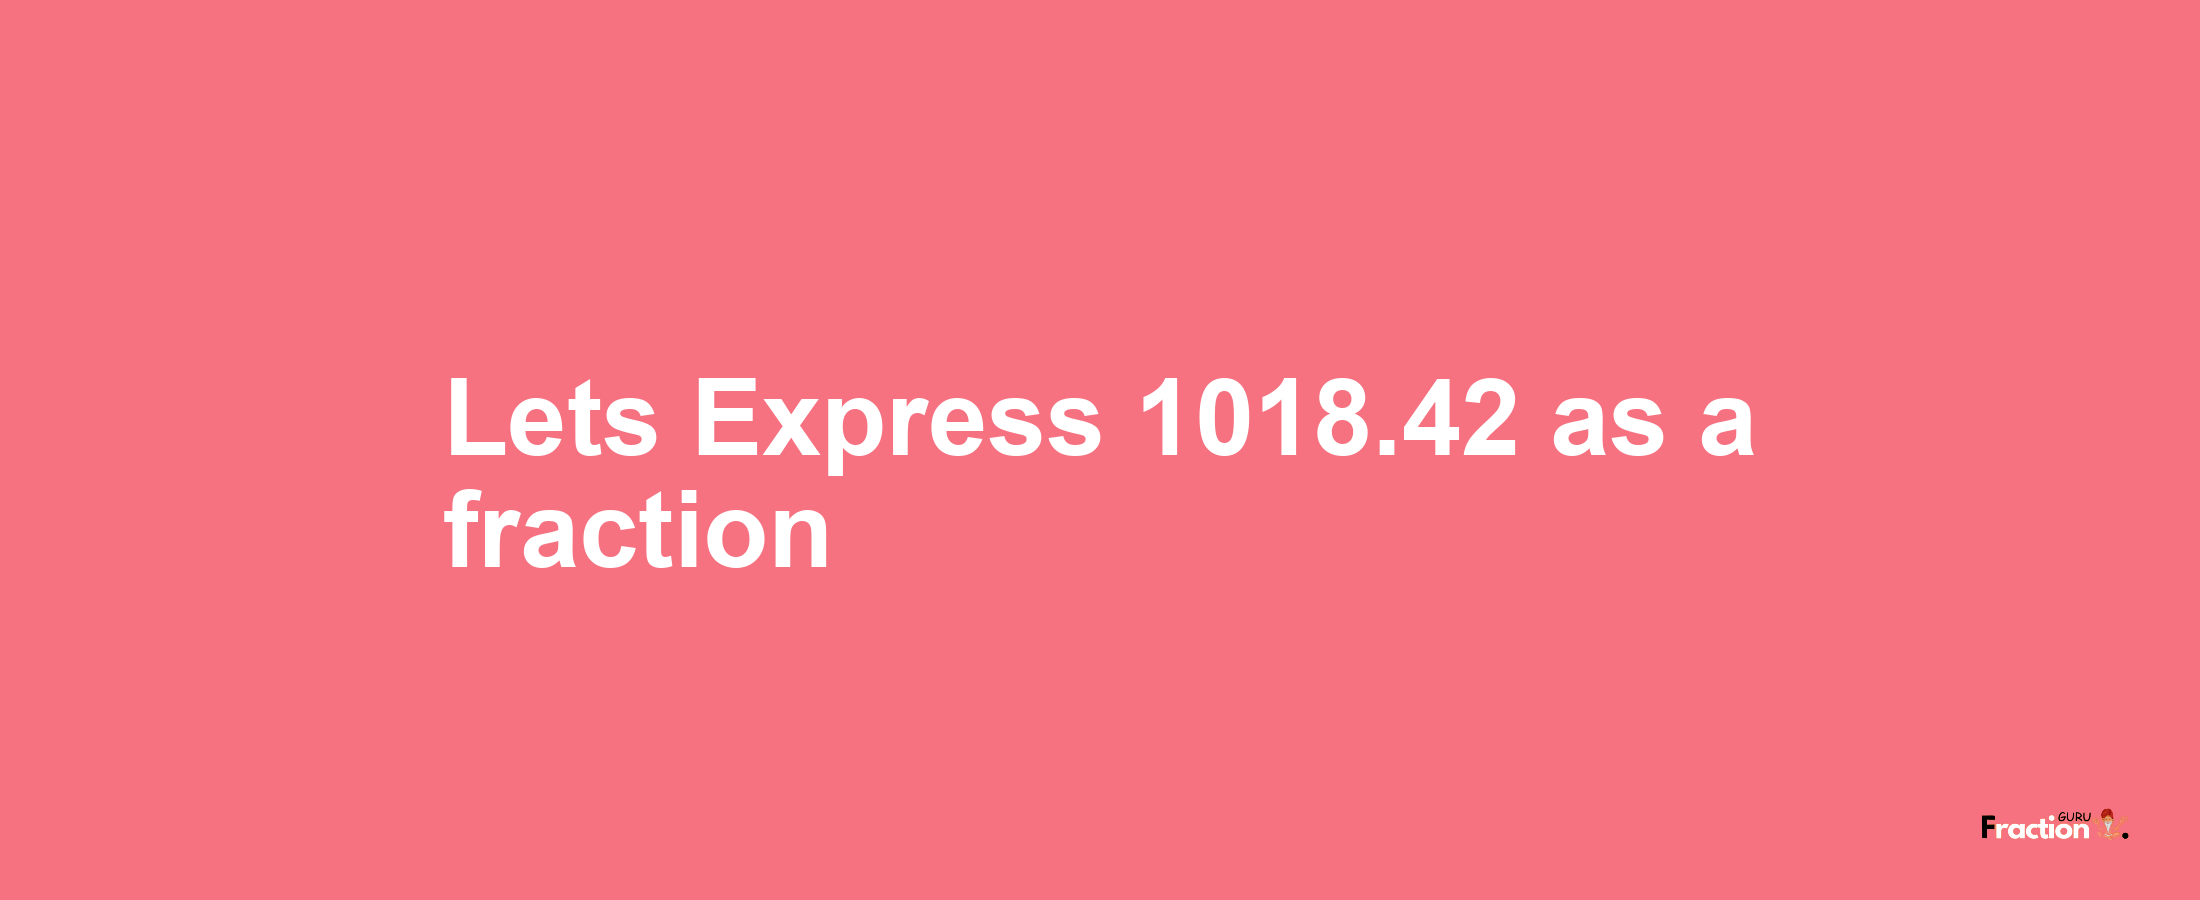 Lets Express 1018.42 as afraction